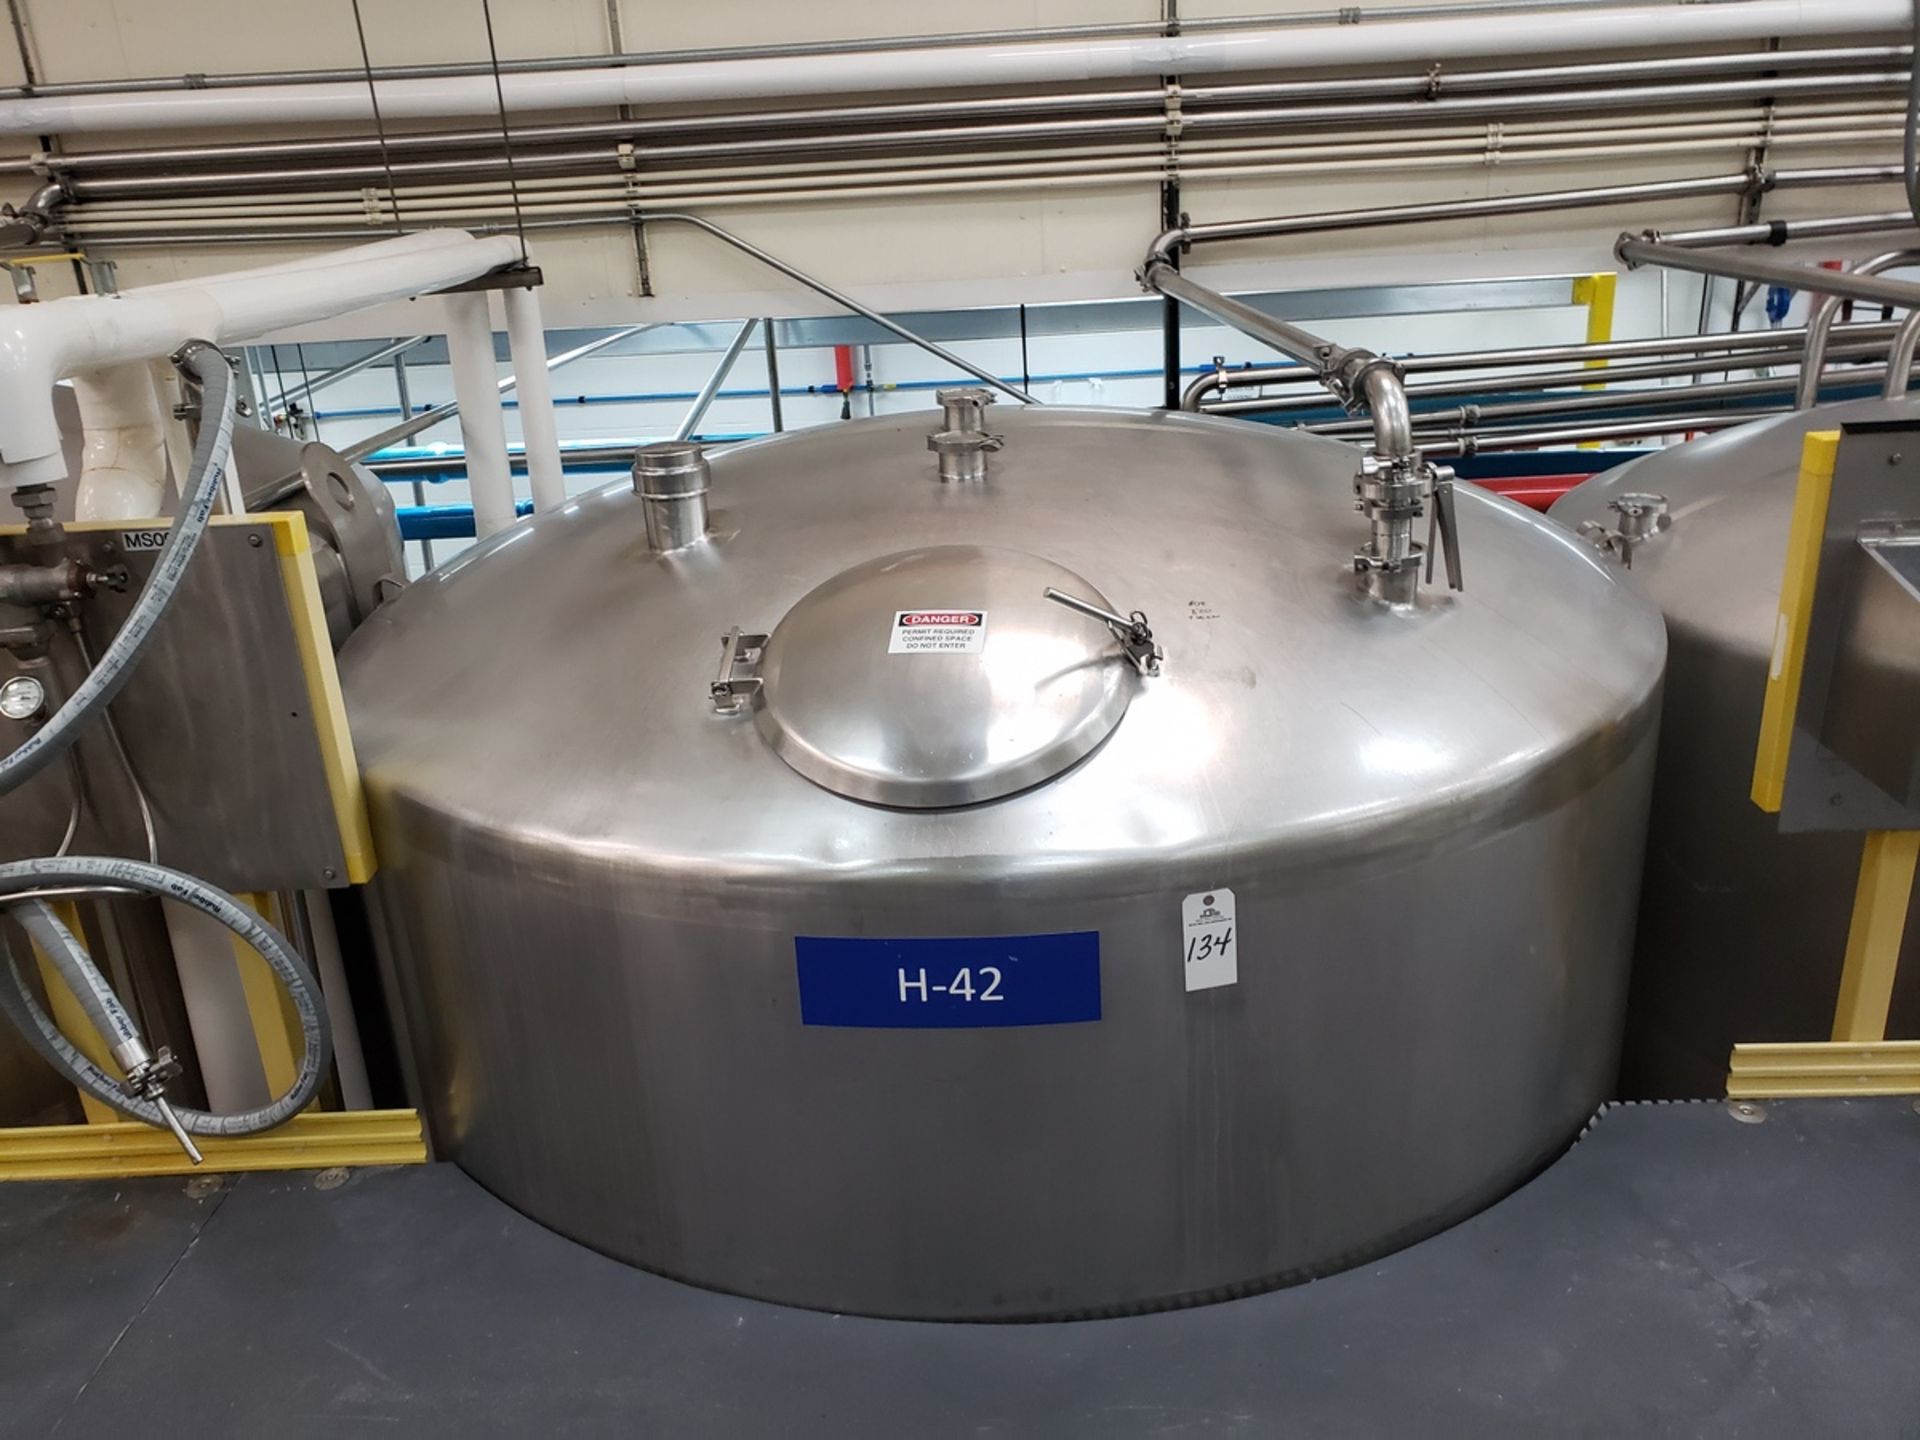 DCI 4,000 Gallon Stainless Steel Mixing Tank, S/N 85-PH-31826-A, Approx Dims: 8' x 1 | Rig Fee $3500